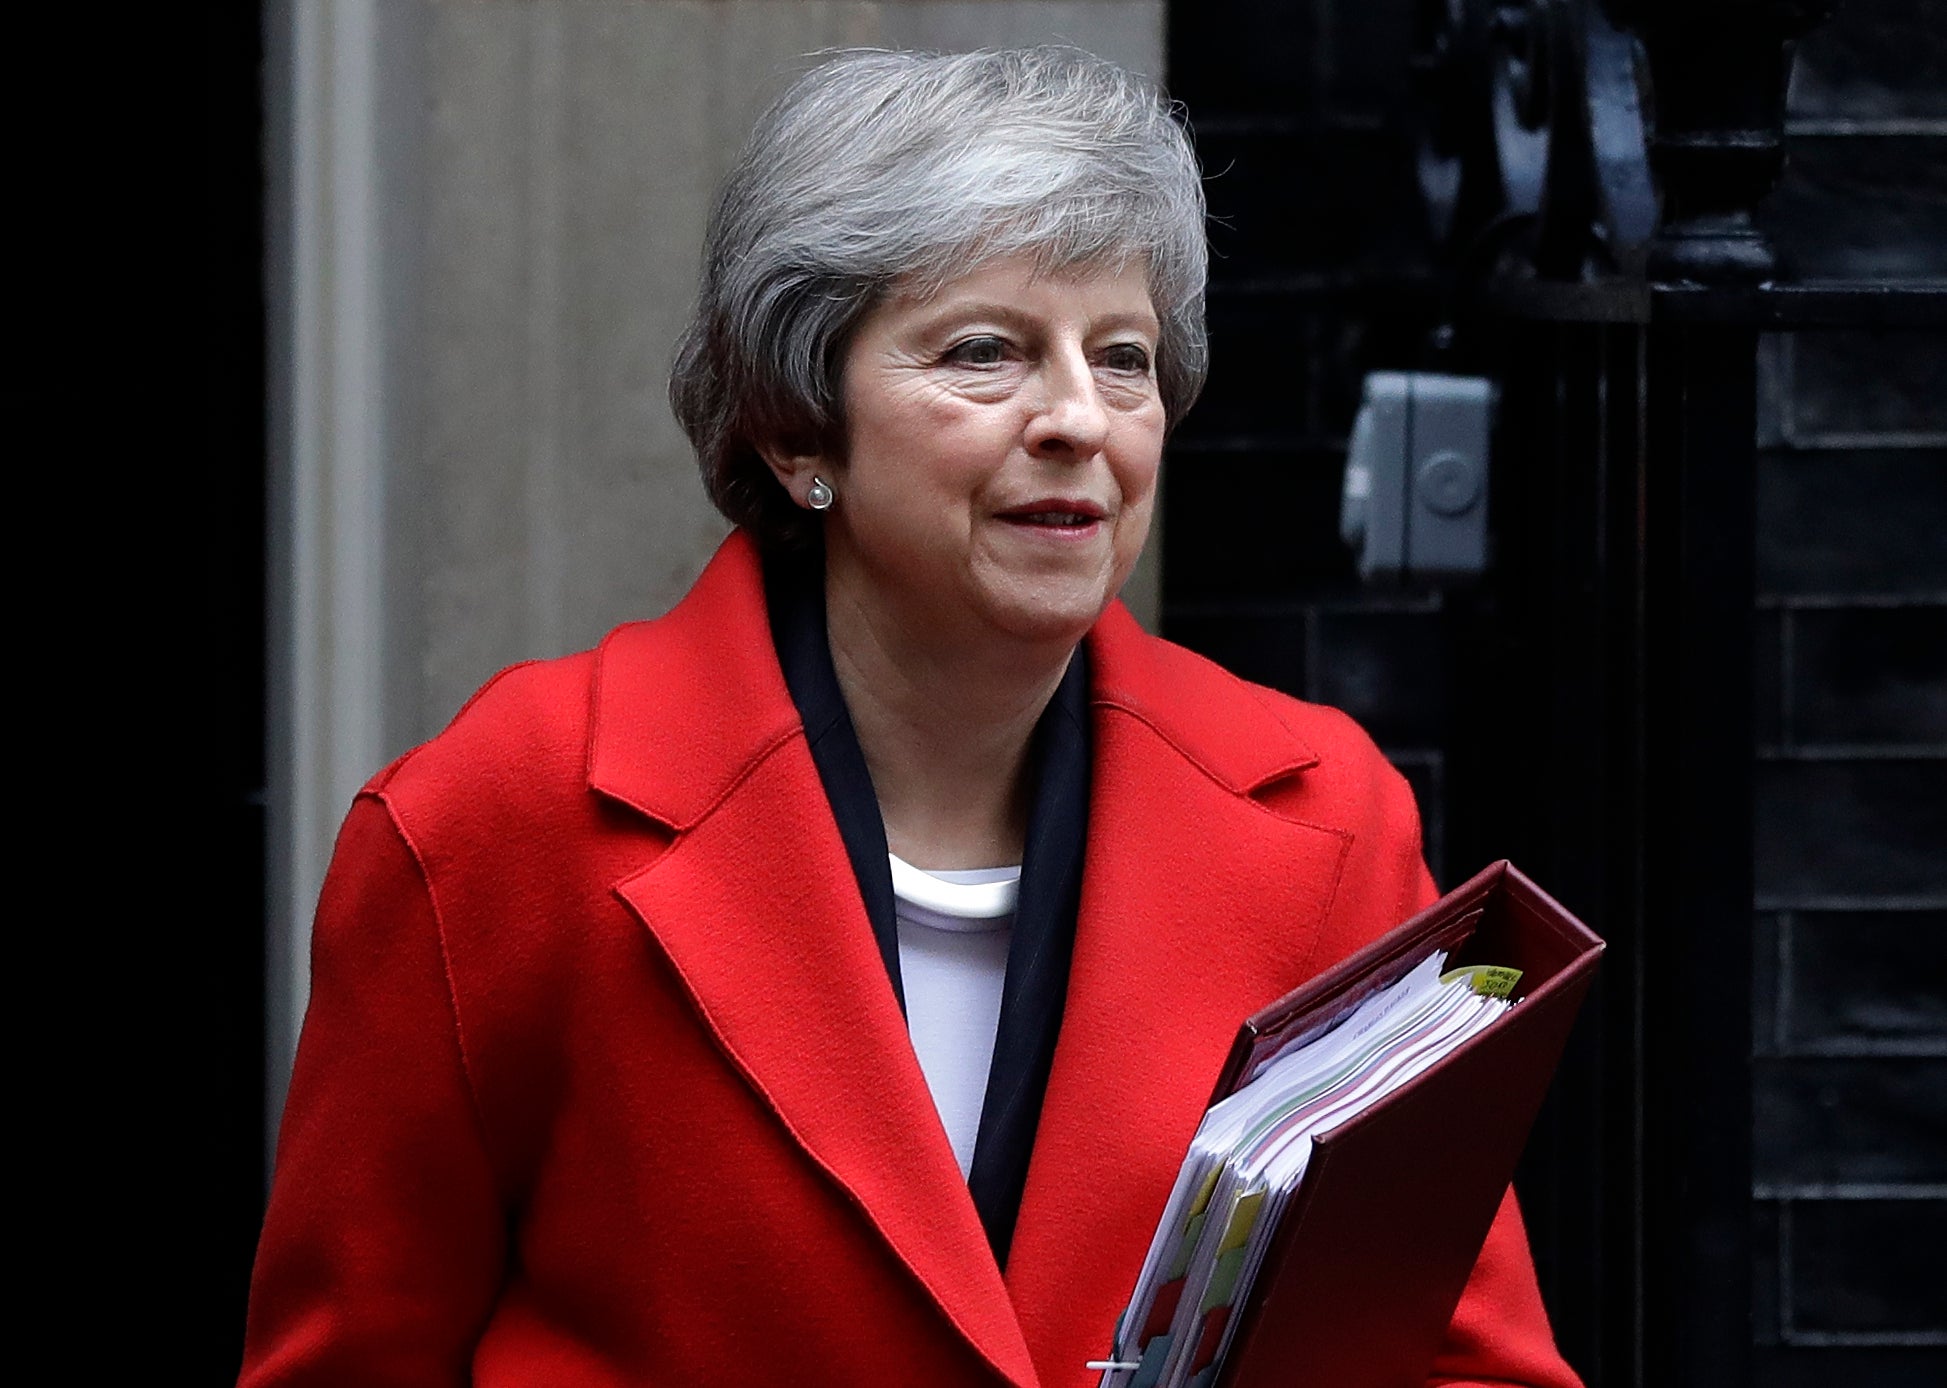 Treaties and deals throughout history could give May's 'bad' Brexit deal a run for its money